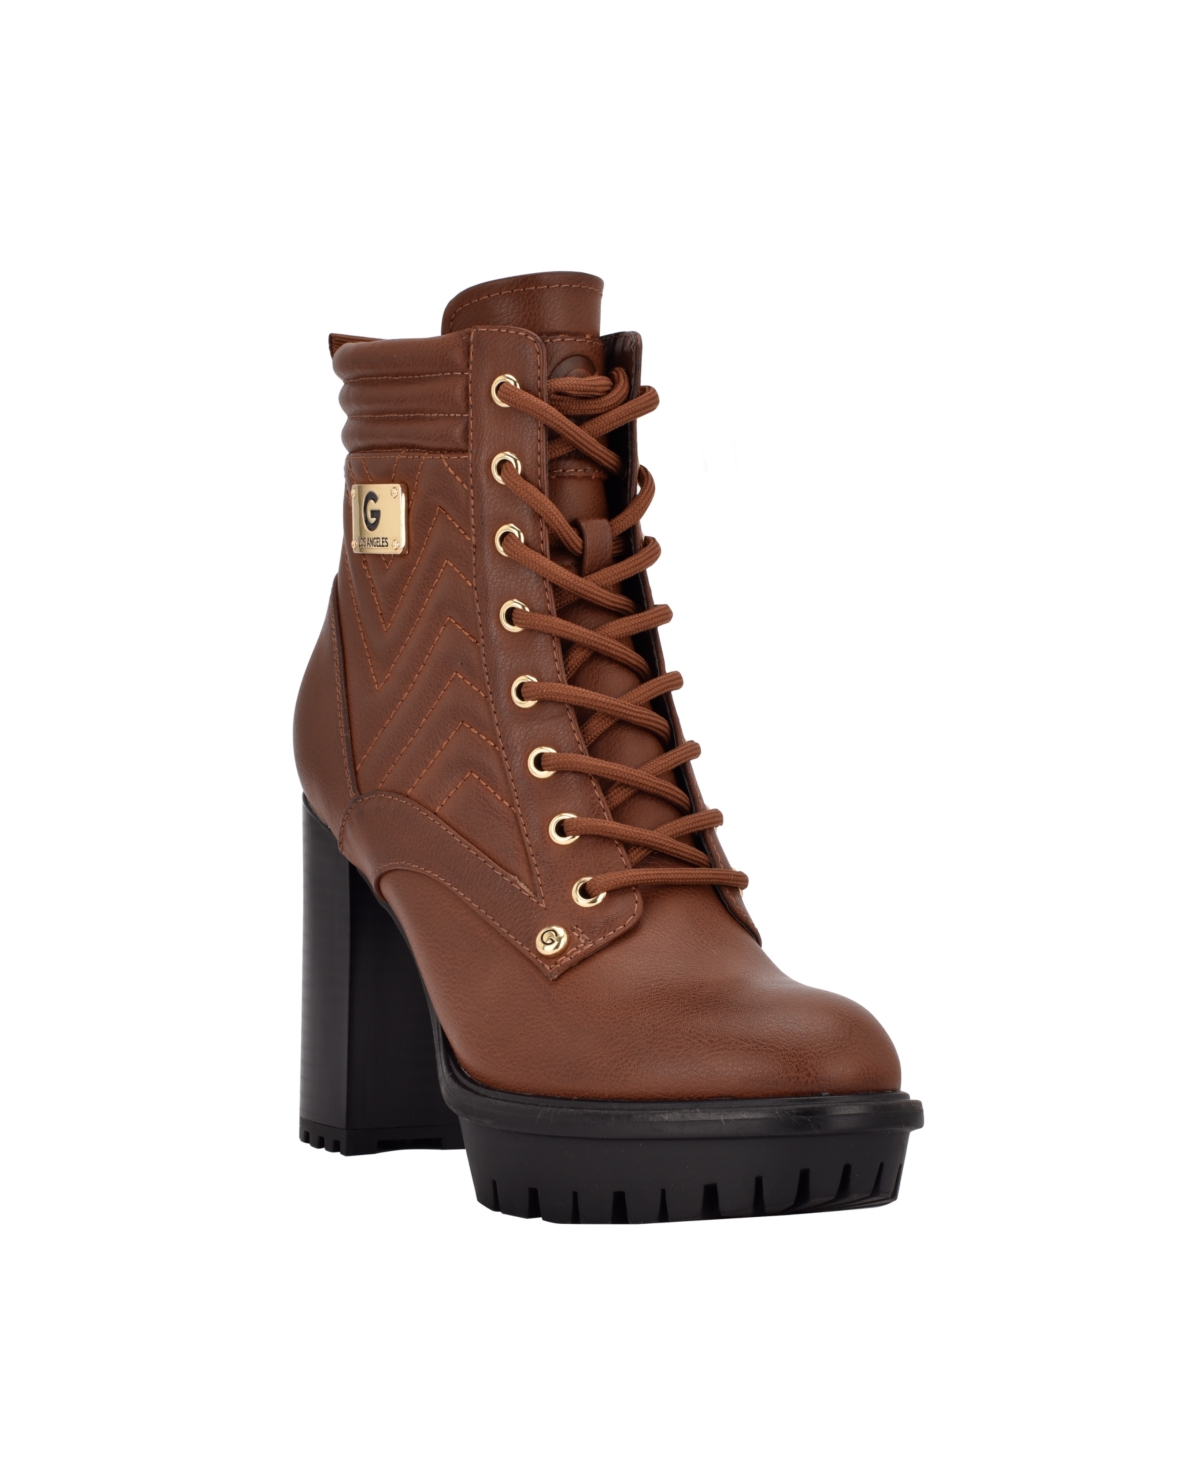 Gbg Los Angeles Women's Sellia Heeled Lug Sole Quilted Hiker Boots